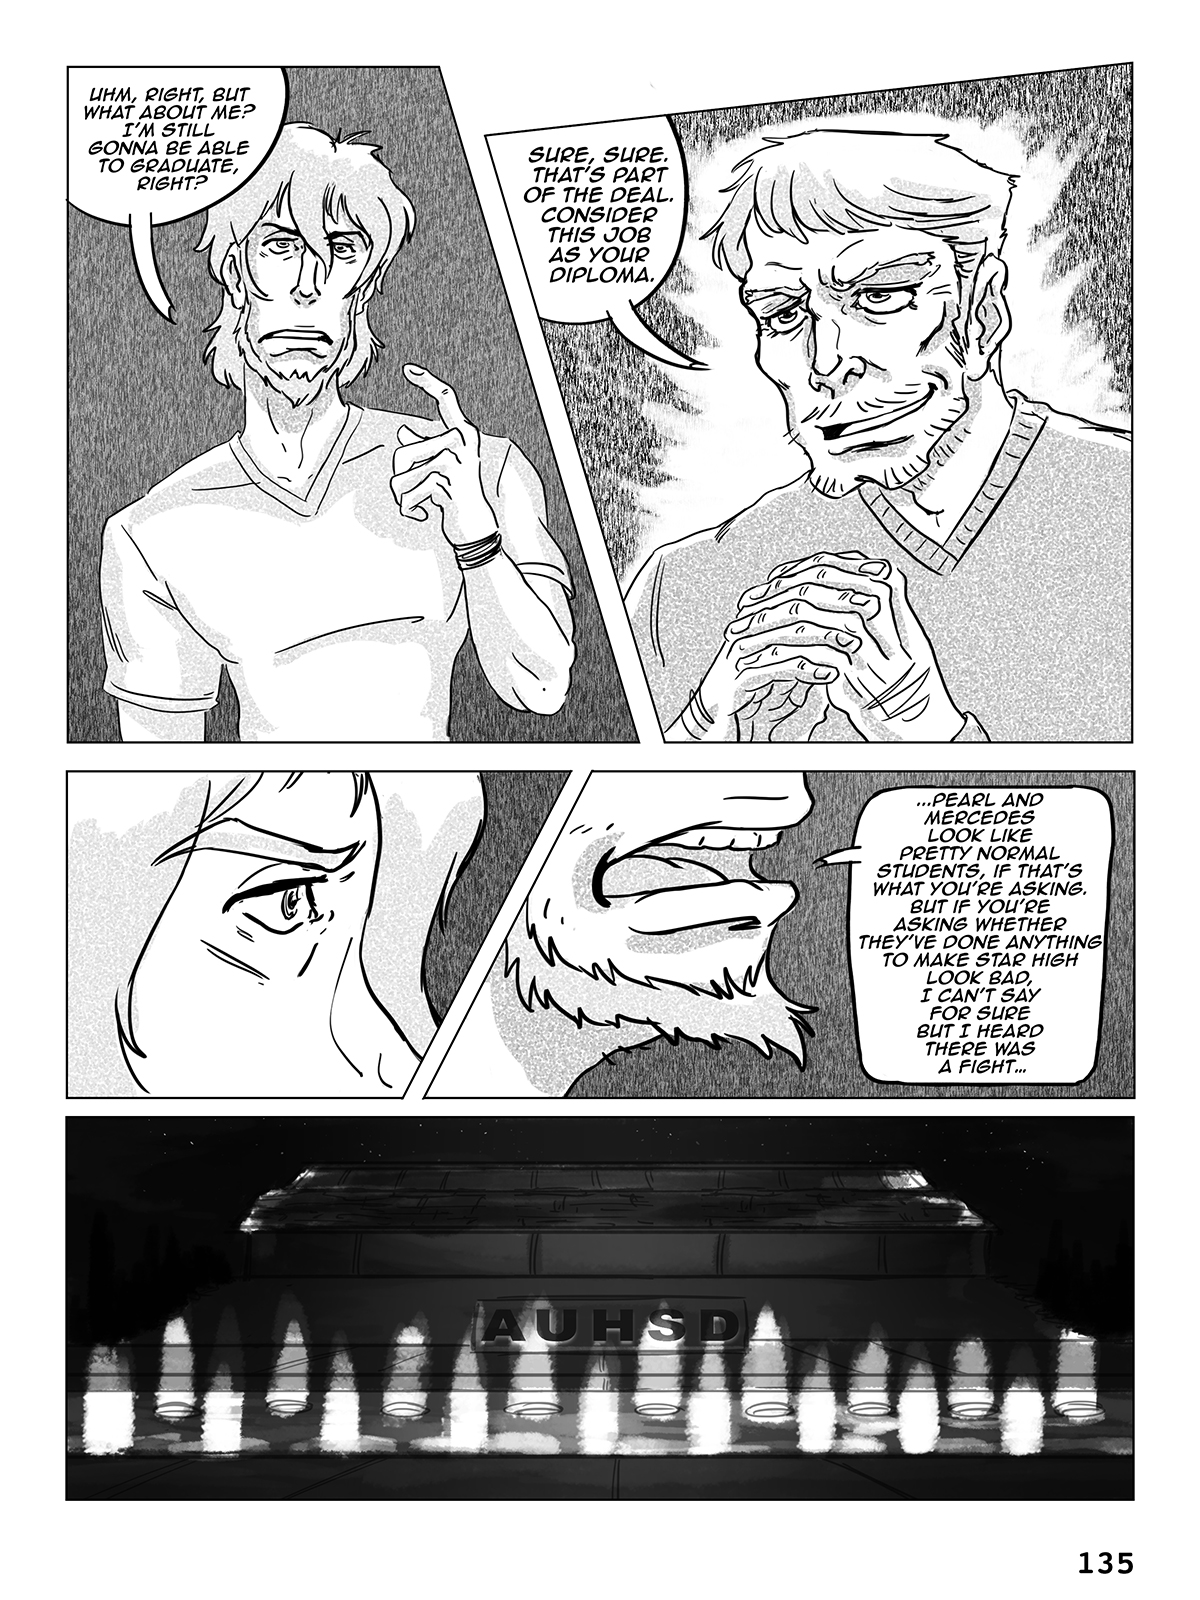 Hockey, Love, & GUTS! – Chapter 6 – Page 135